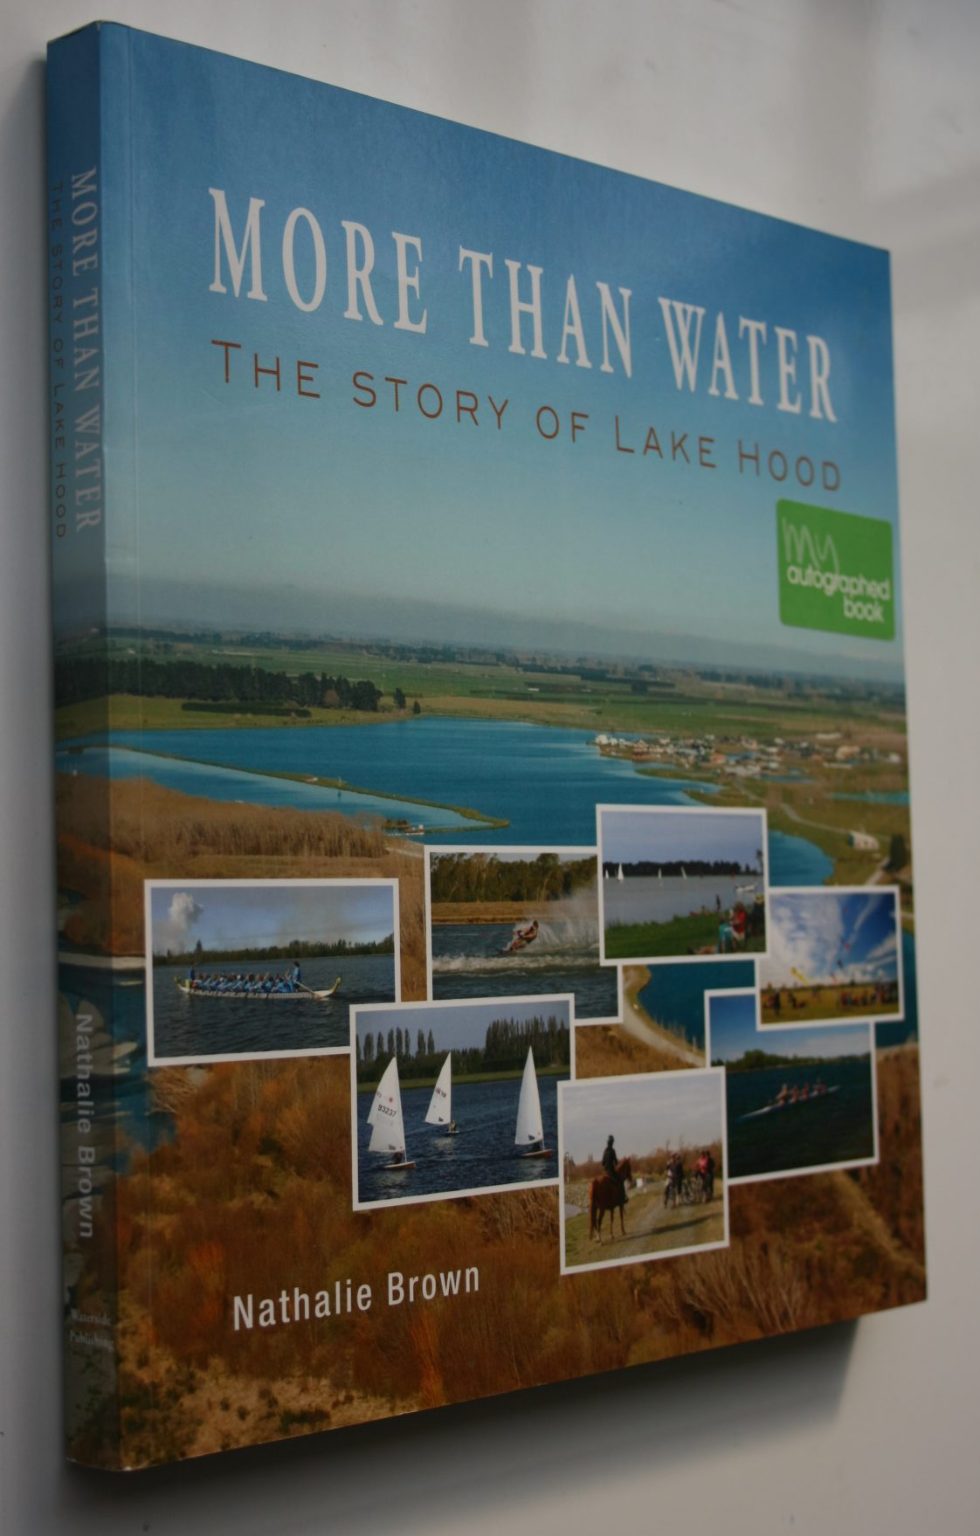 More Than Water The Story of Lake Hood By Nathalie Brown. SCARCE. SIGNED BY AUTHOR.